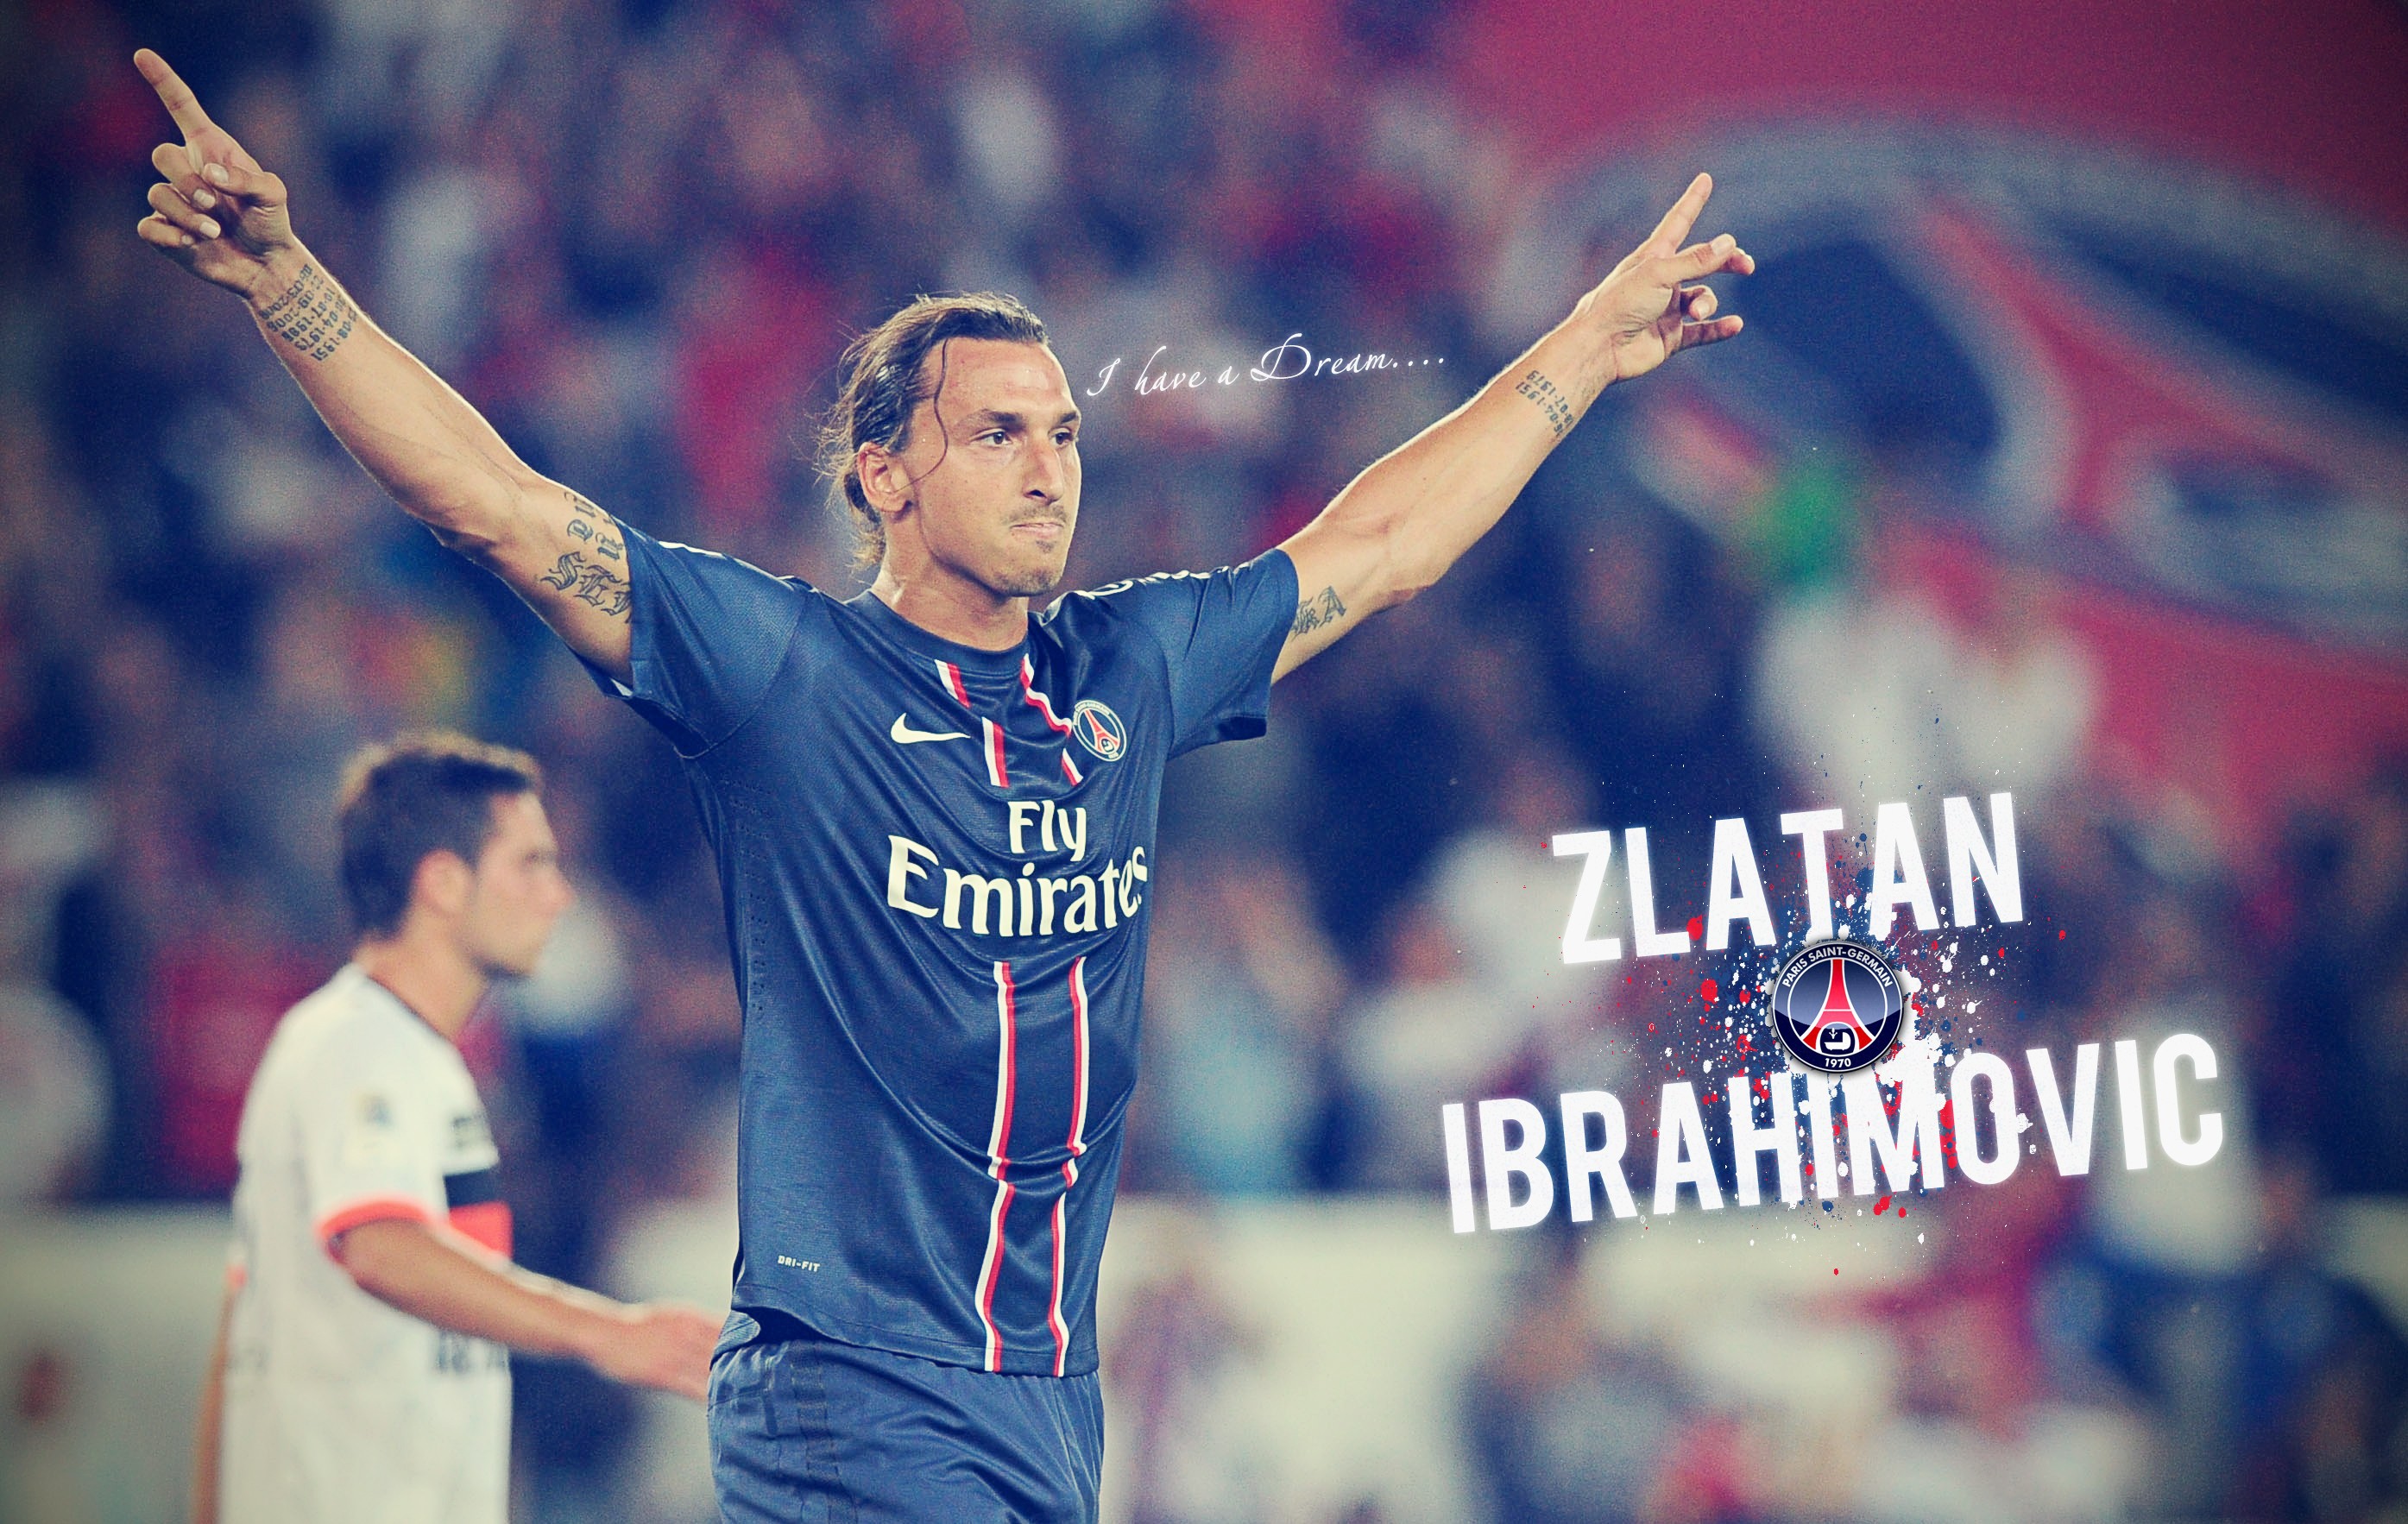 The Player Of Psg Zlatan Ibrahimovic After The Victory - Paris , HD Wallpaper & Backgrounds